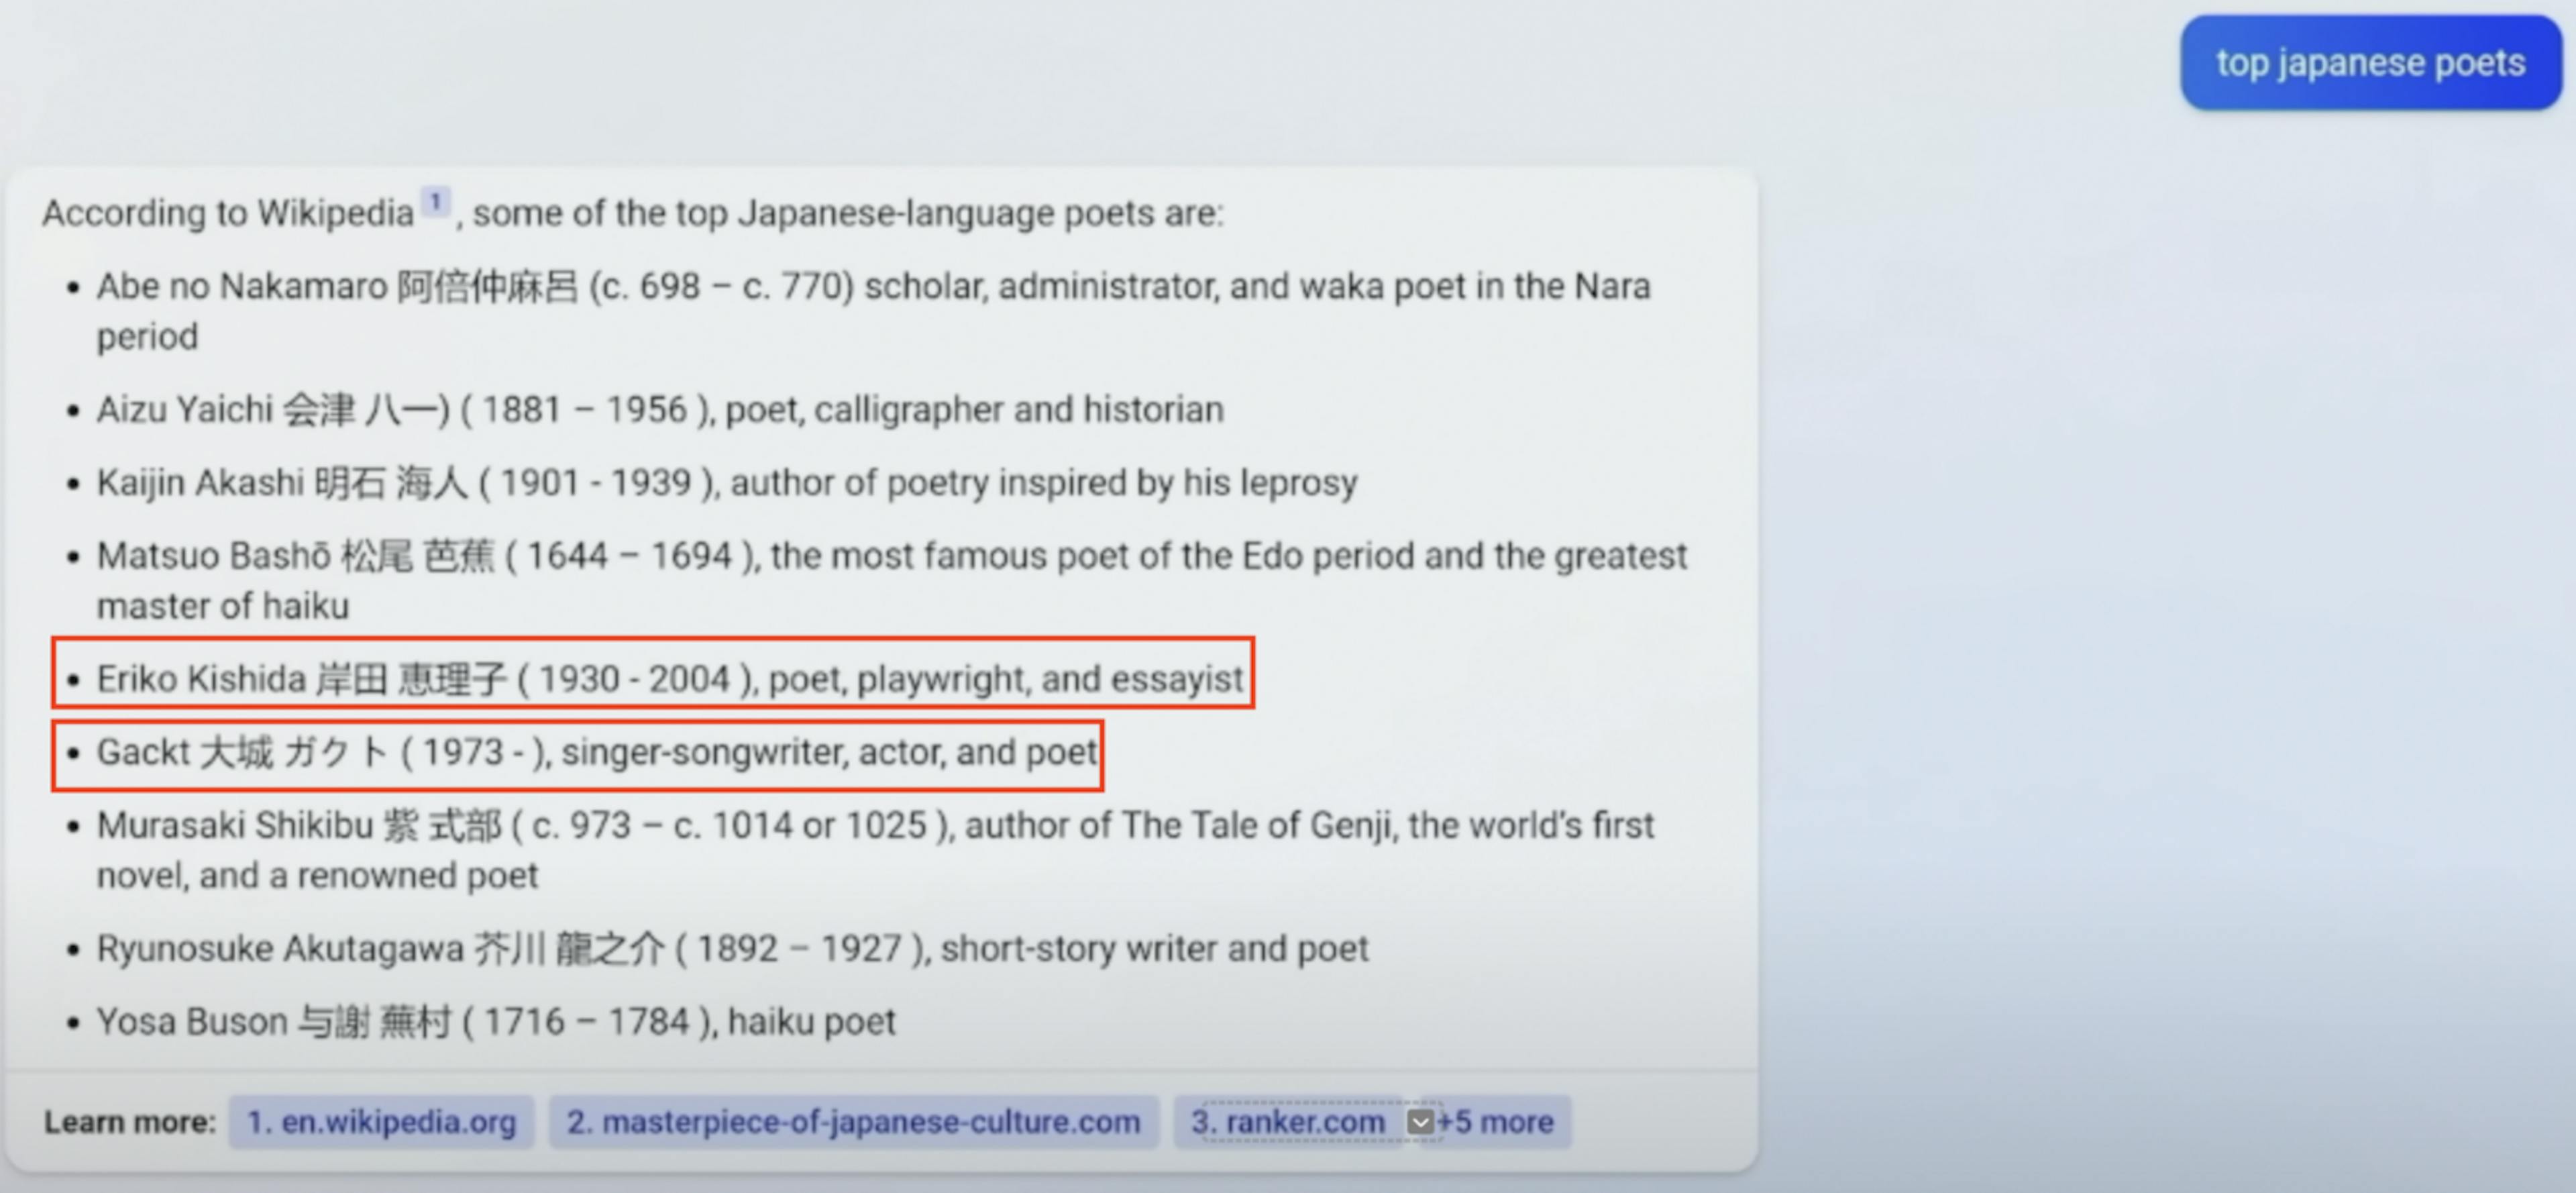 Figure 8: Top Japanese poets summary generated by the new Bing in the press release.